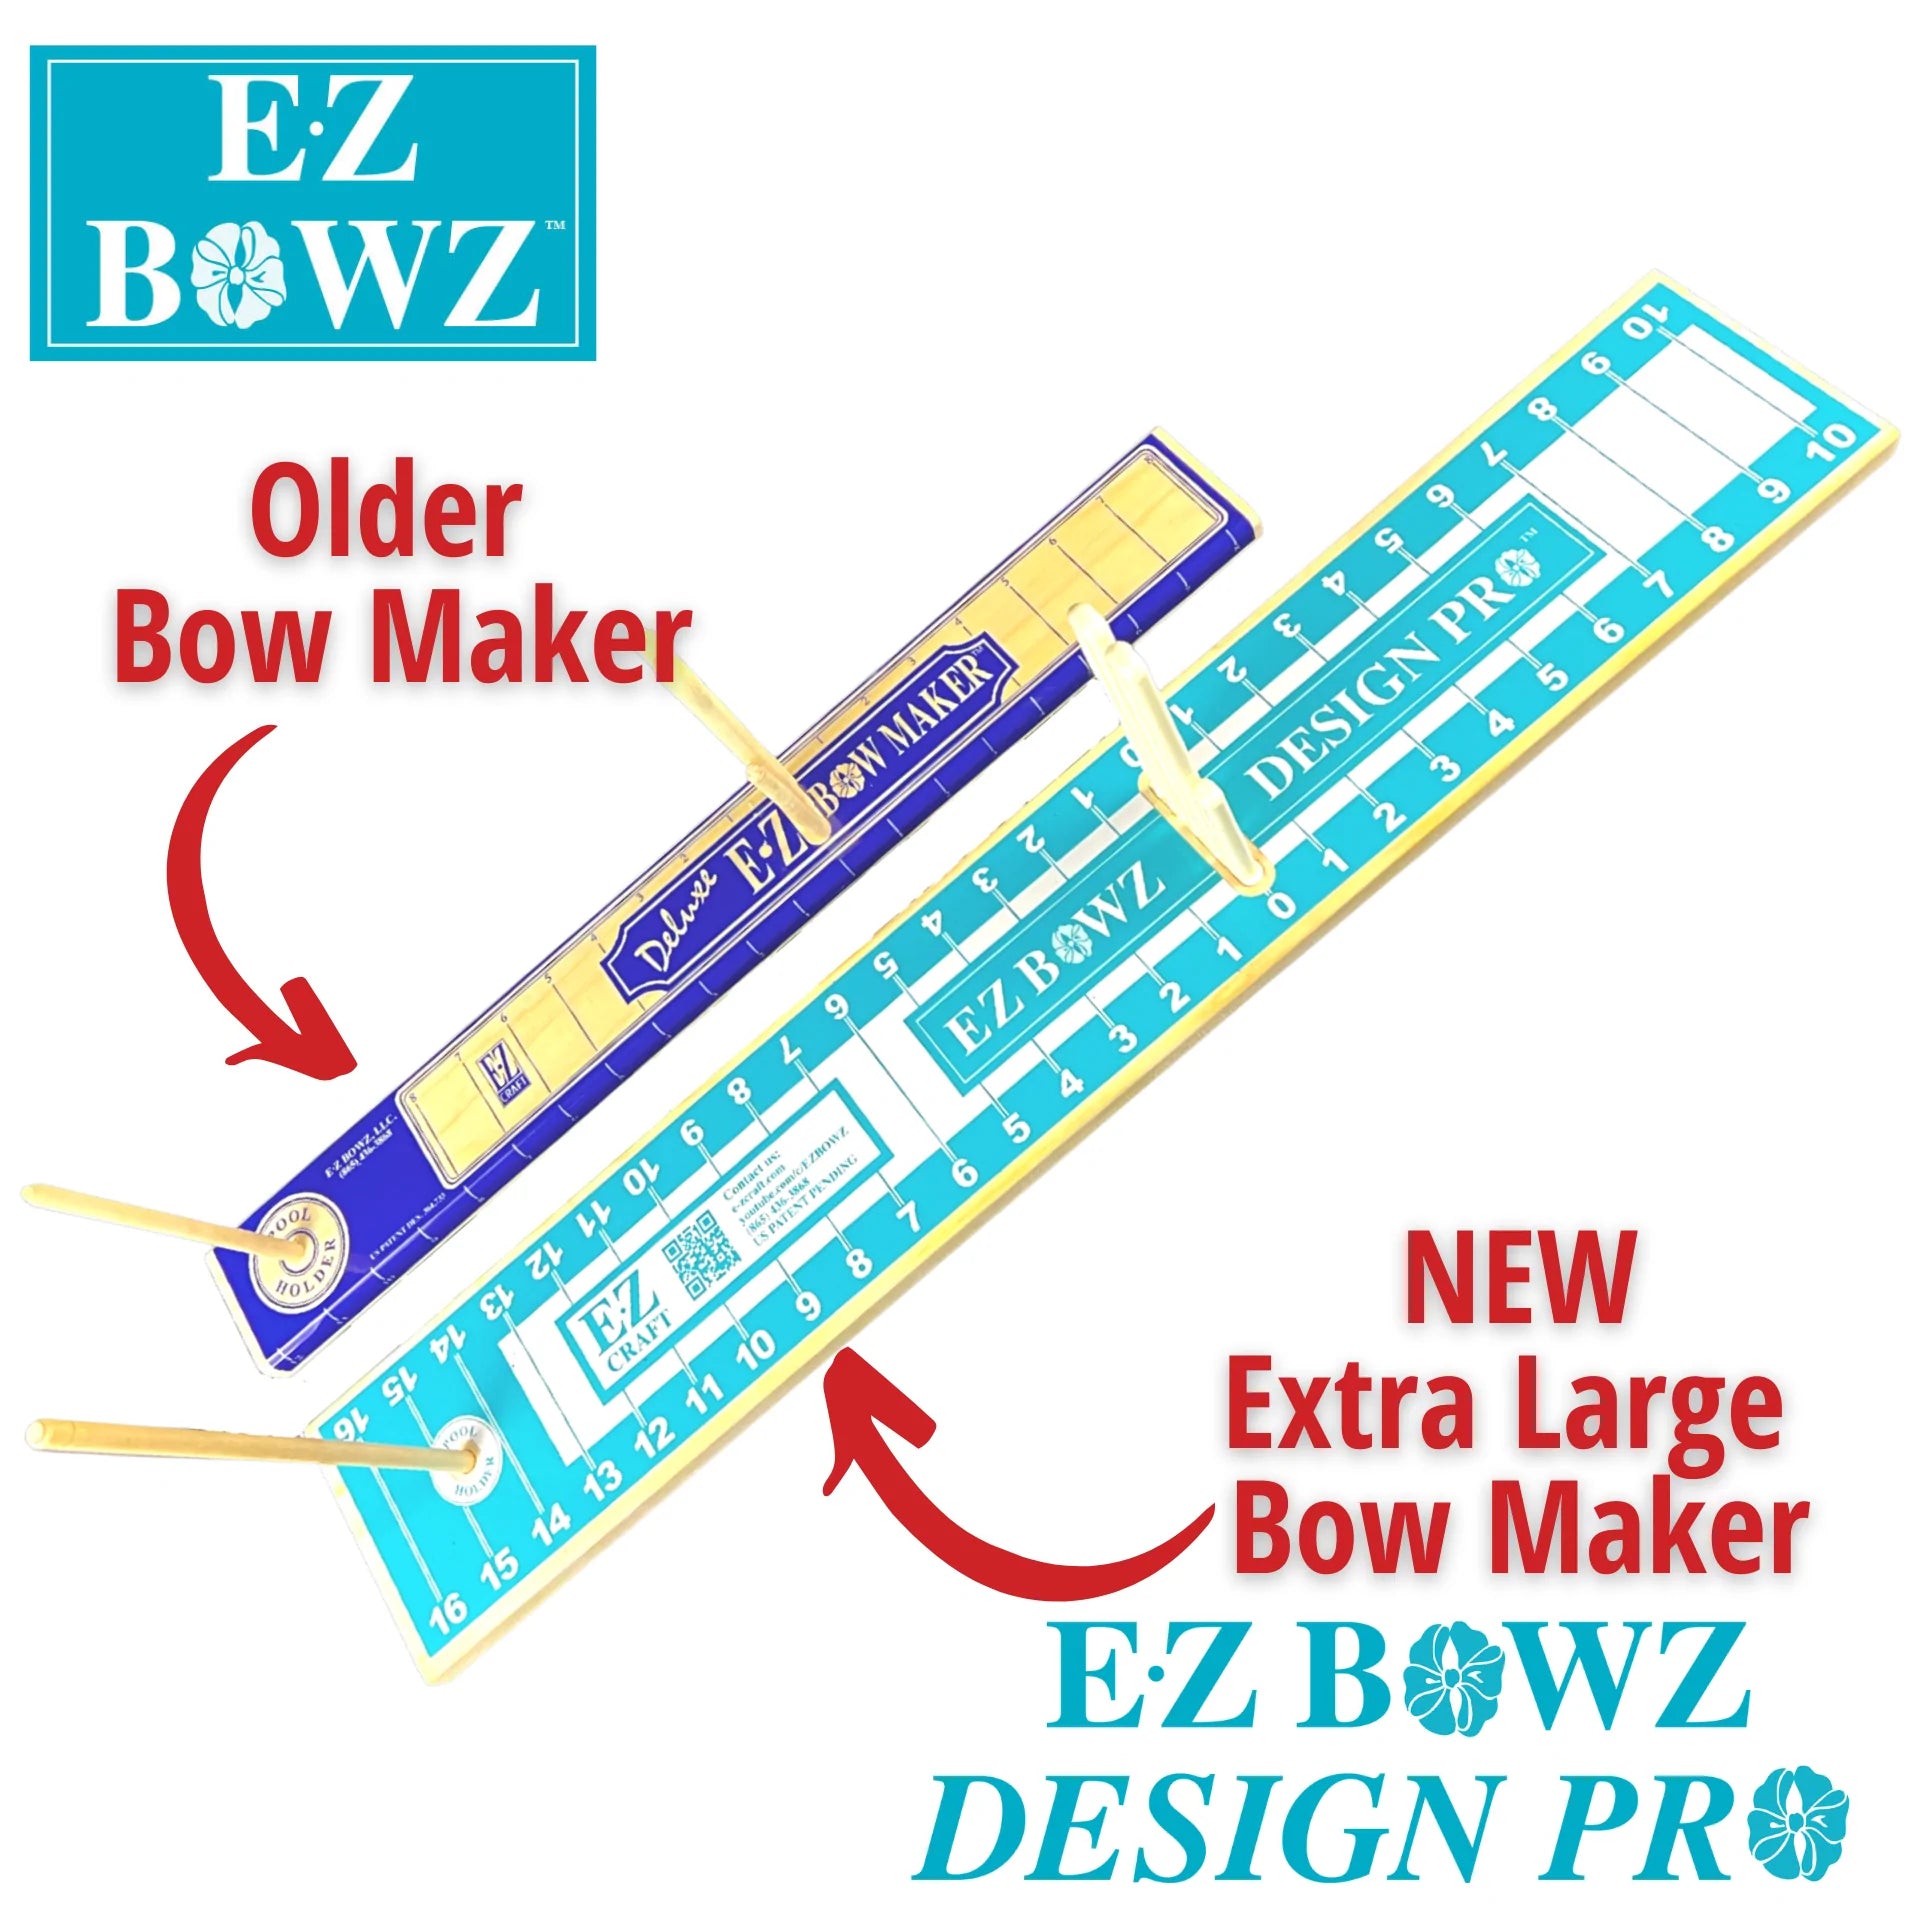 EZ Bowz Stow & Go Bow Maker with Detachable Spool Holder and Tote